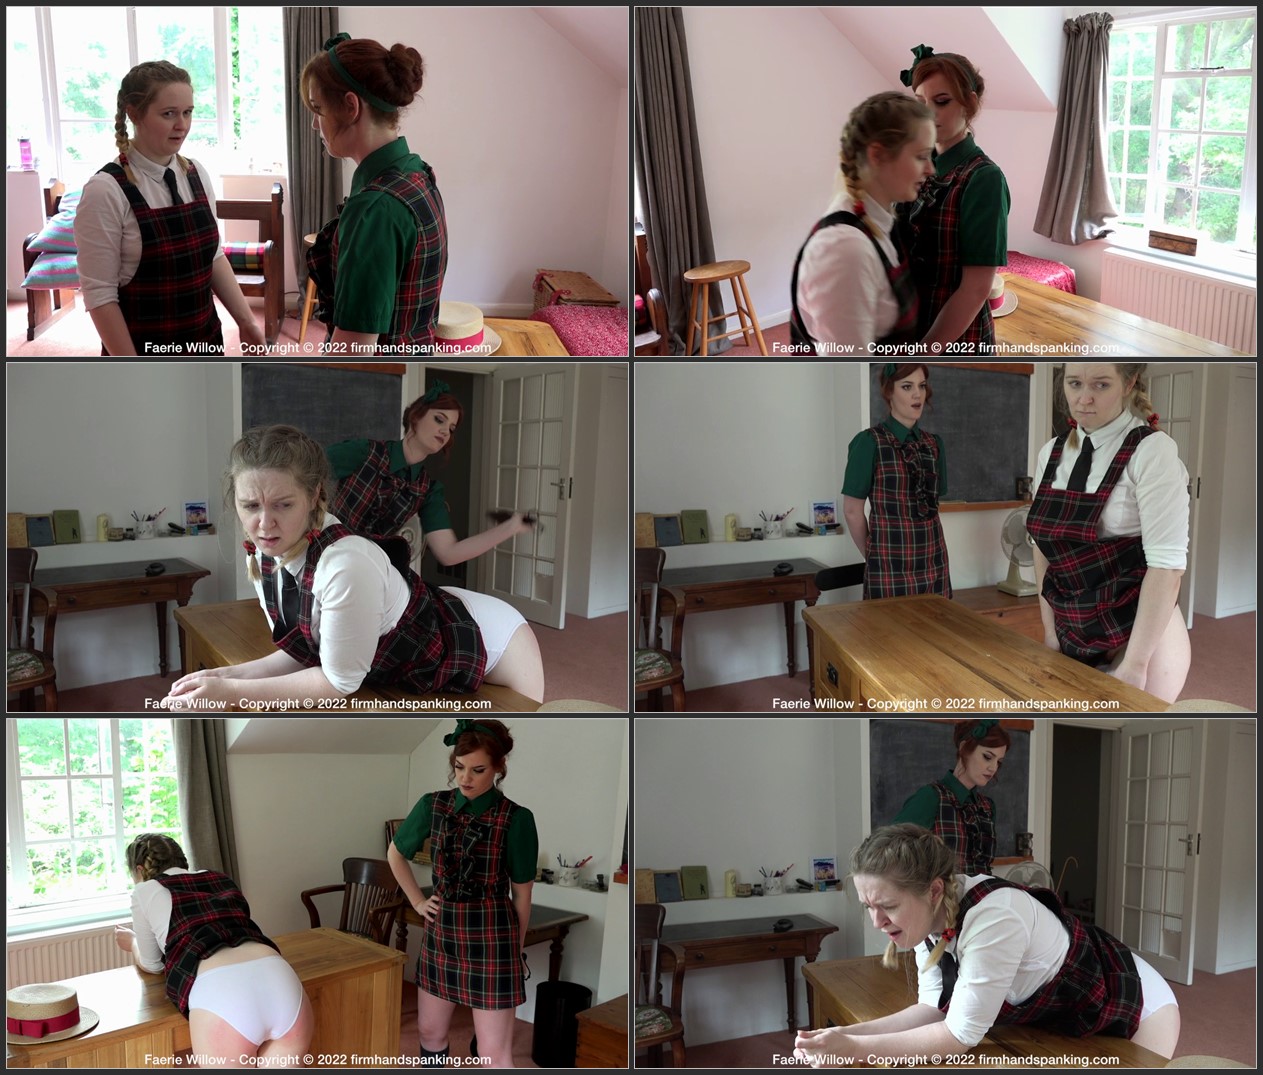 FirmHandSpanking - Faerie Willow and Zoe Page - Head Girl Trouble - J